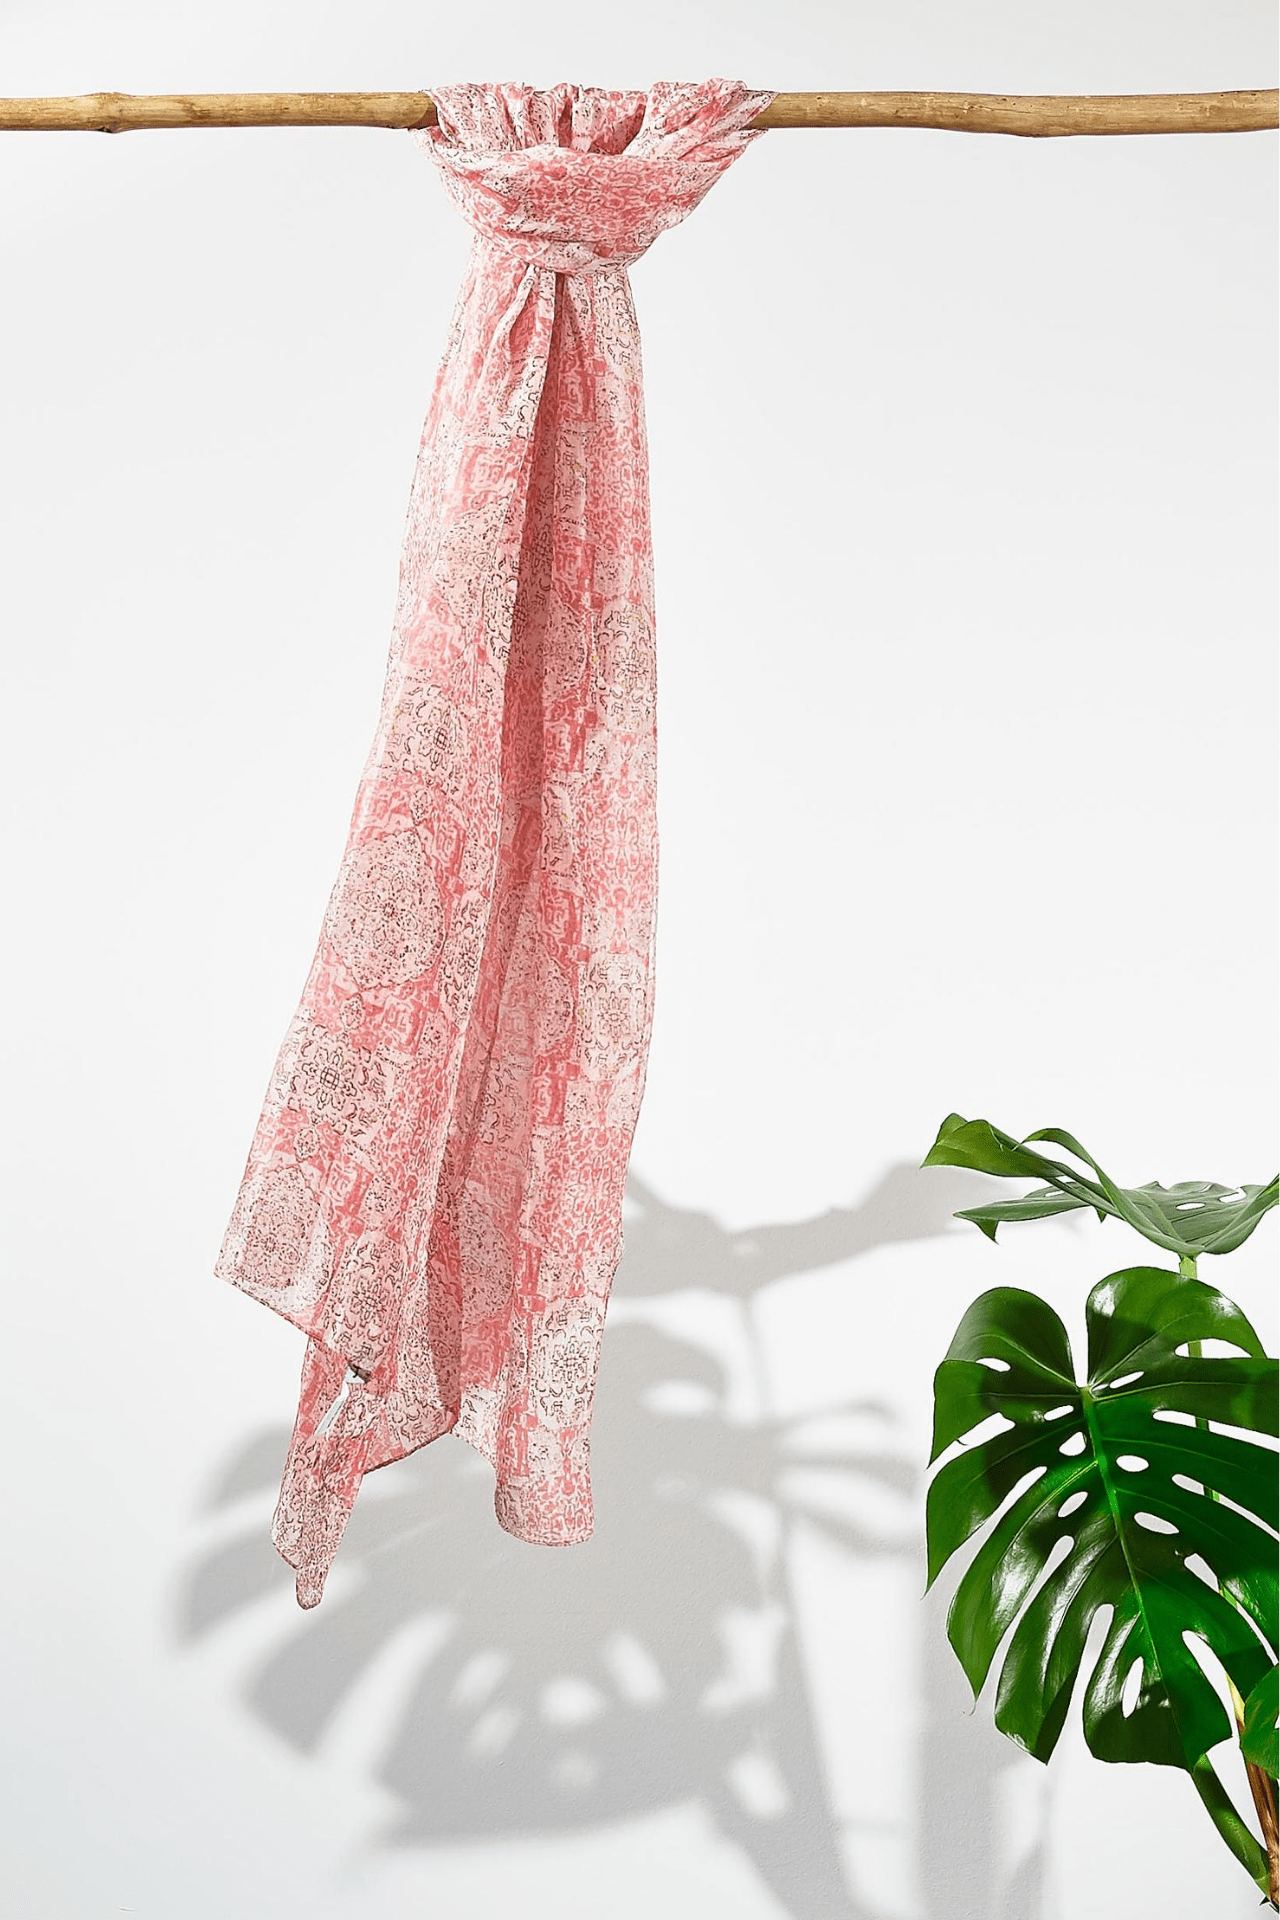 The rosewater moroccan silk scarf hanging from a rod. Showing how smooth the silk is as it hangs. The scarf is a light pink with a dark pink busy pattern on it